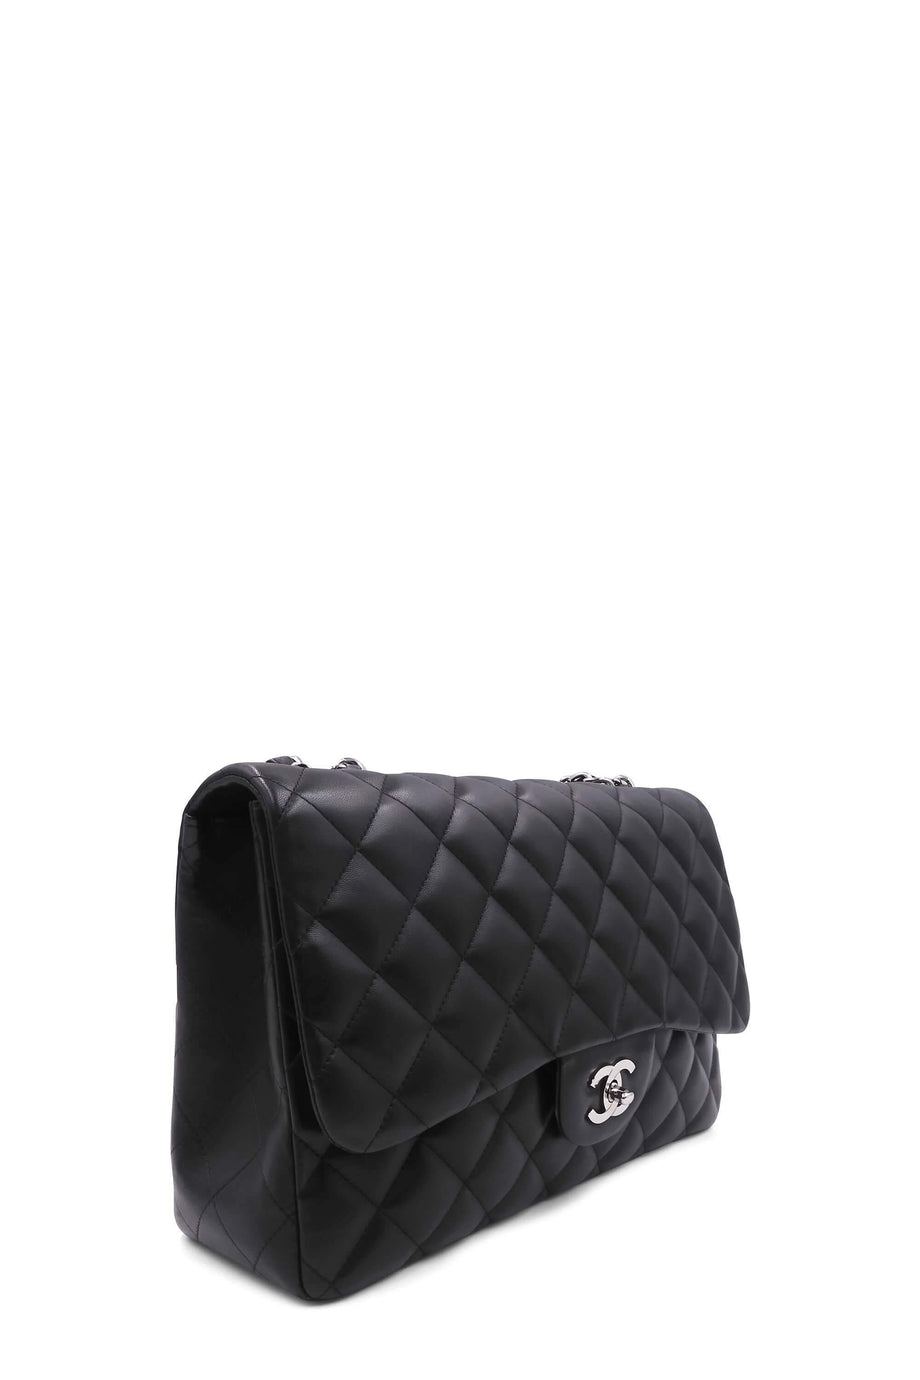 Buy Authentic, Preloved Chanel Quilted Lambskin Jumbo Classic Flap Bag  Black with Silver Hardware Bags from Second Edit by Style Theory